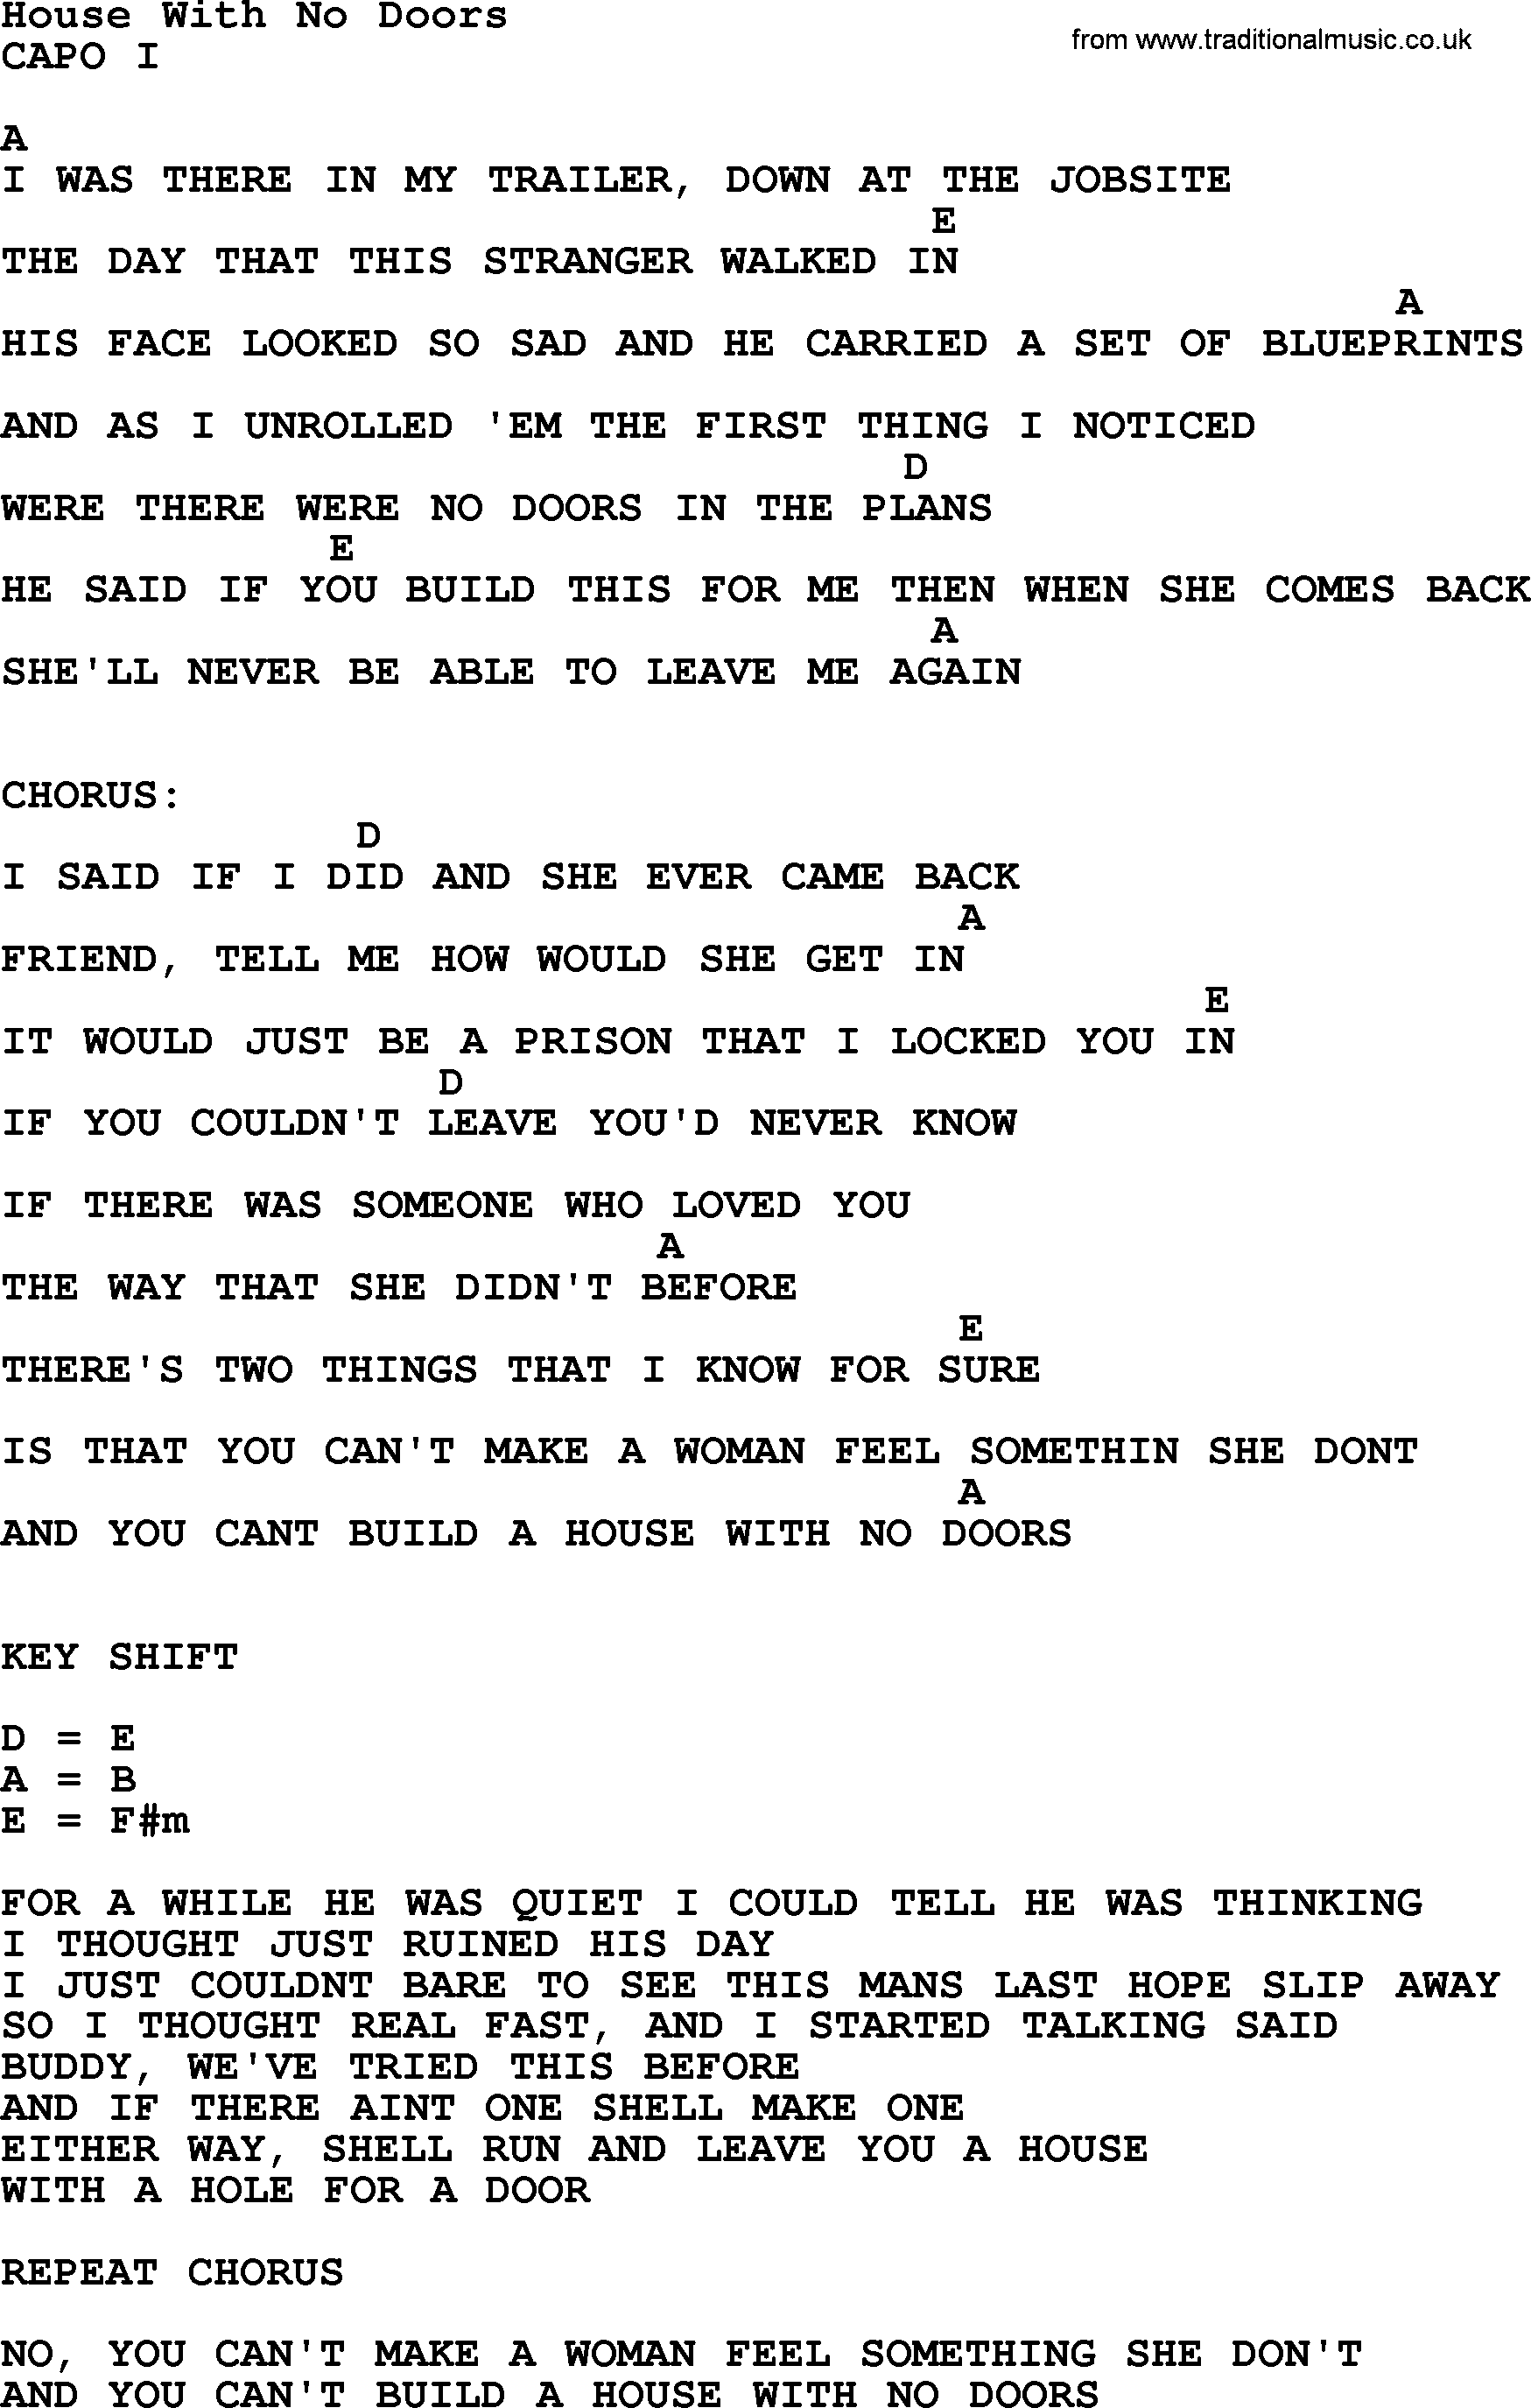 George Strait song: House With No Doors, lyrics and chords